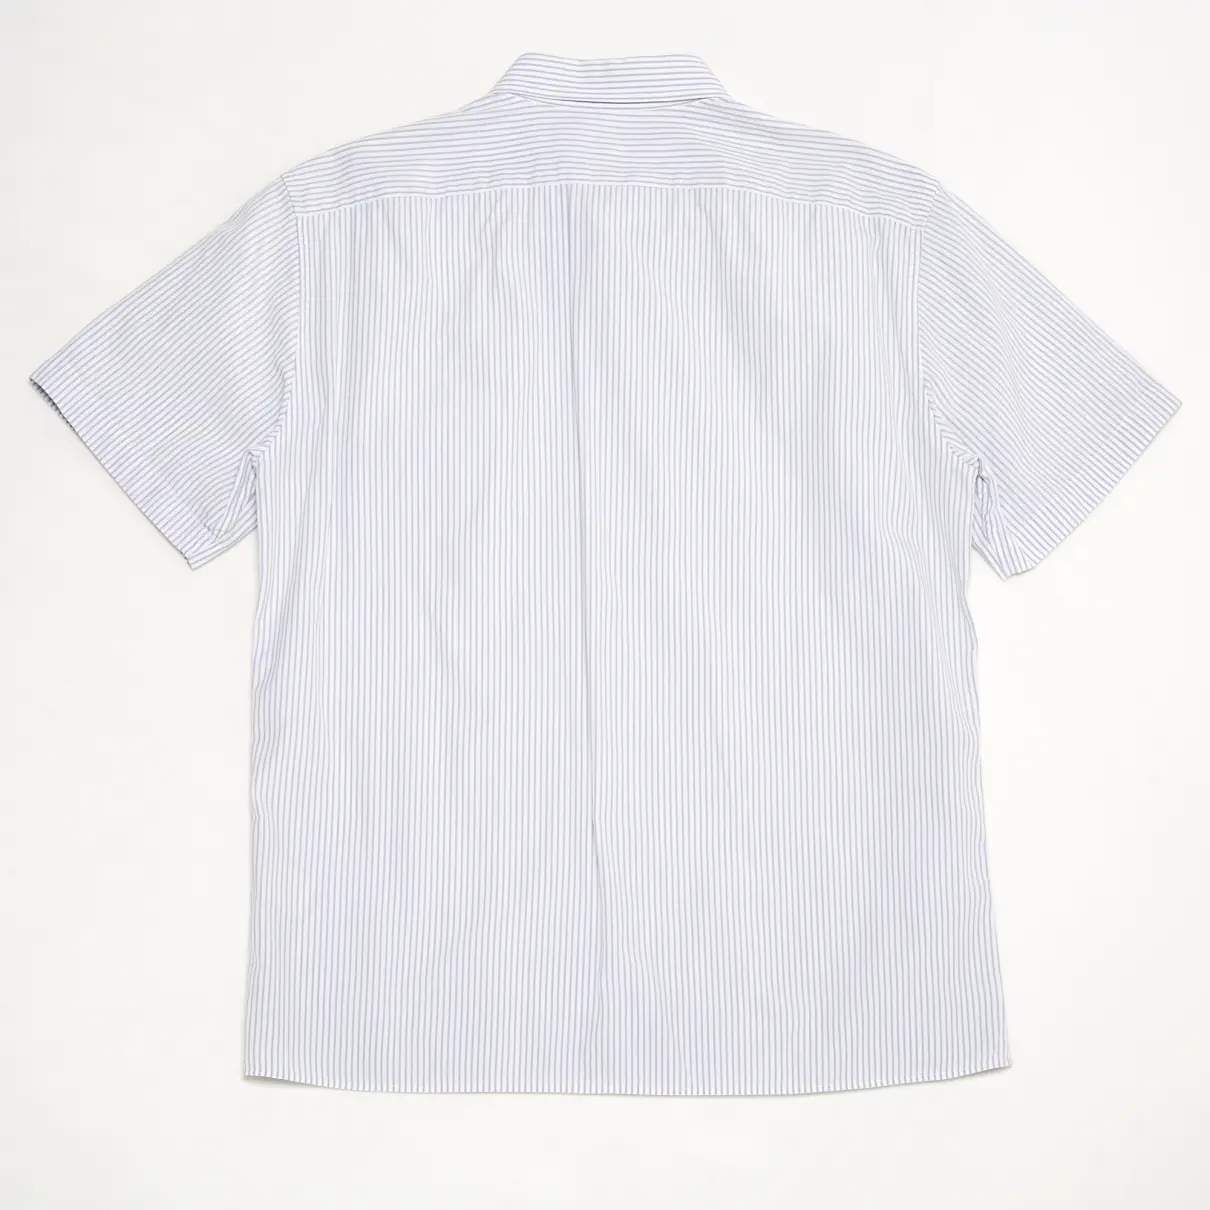 Marc Jacobs Shirt for sale